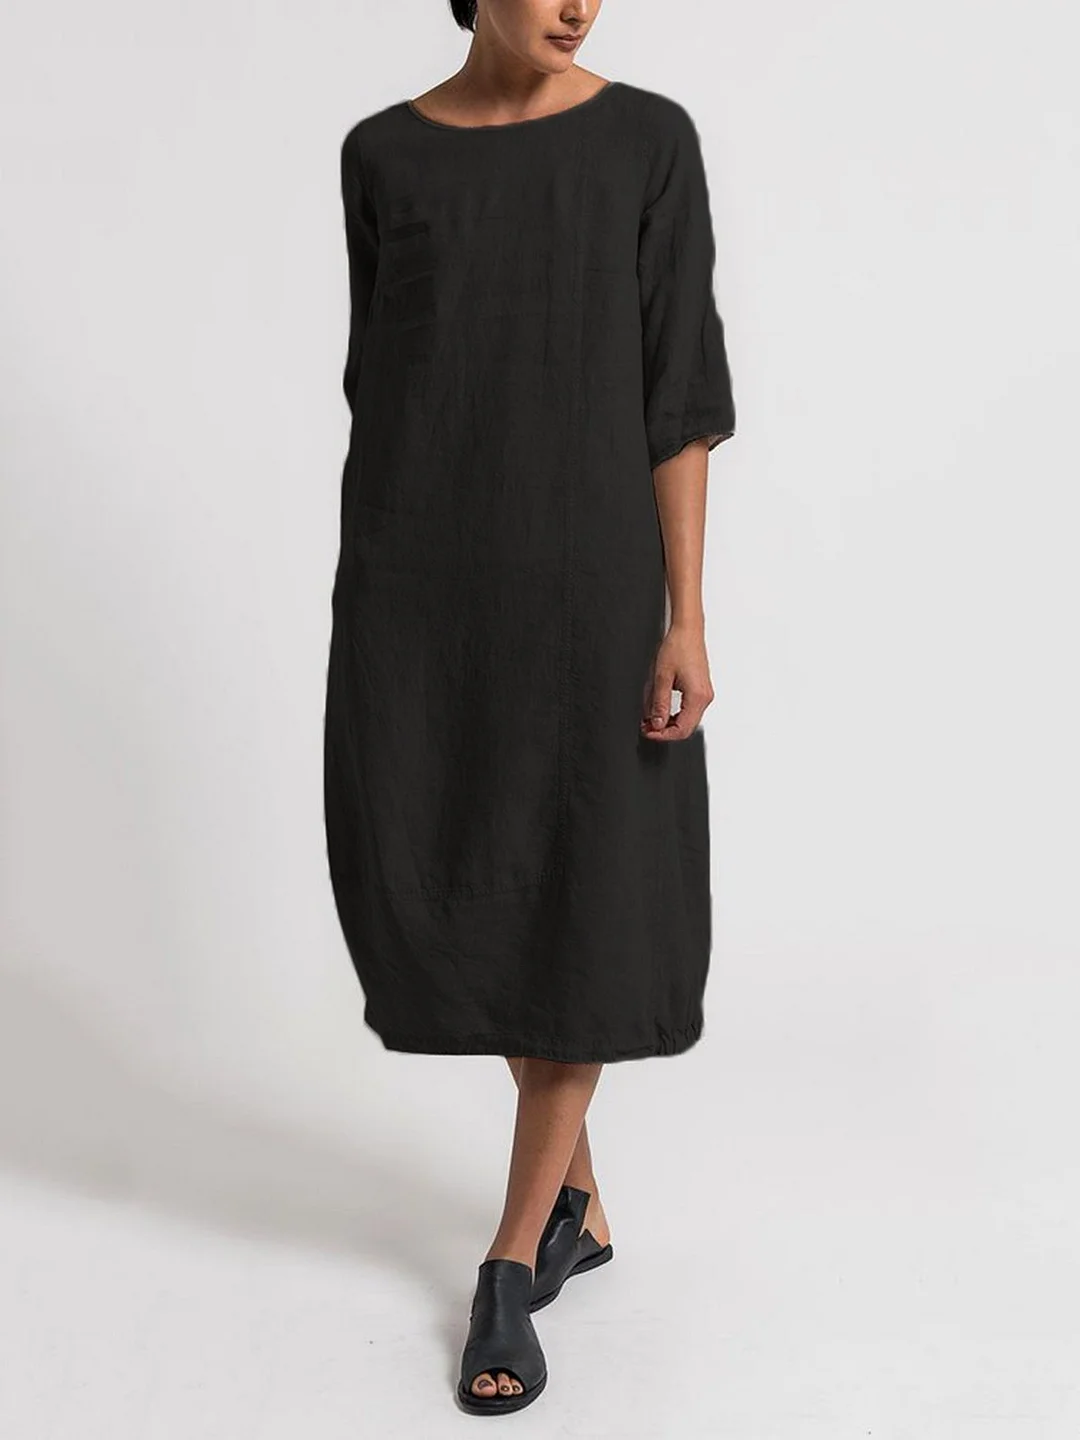 Crew Neck 3/4 Sleeve Casual Solid Casualdress-JRSEE